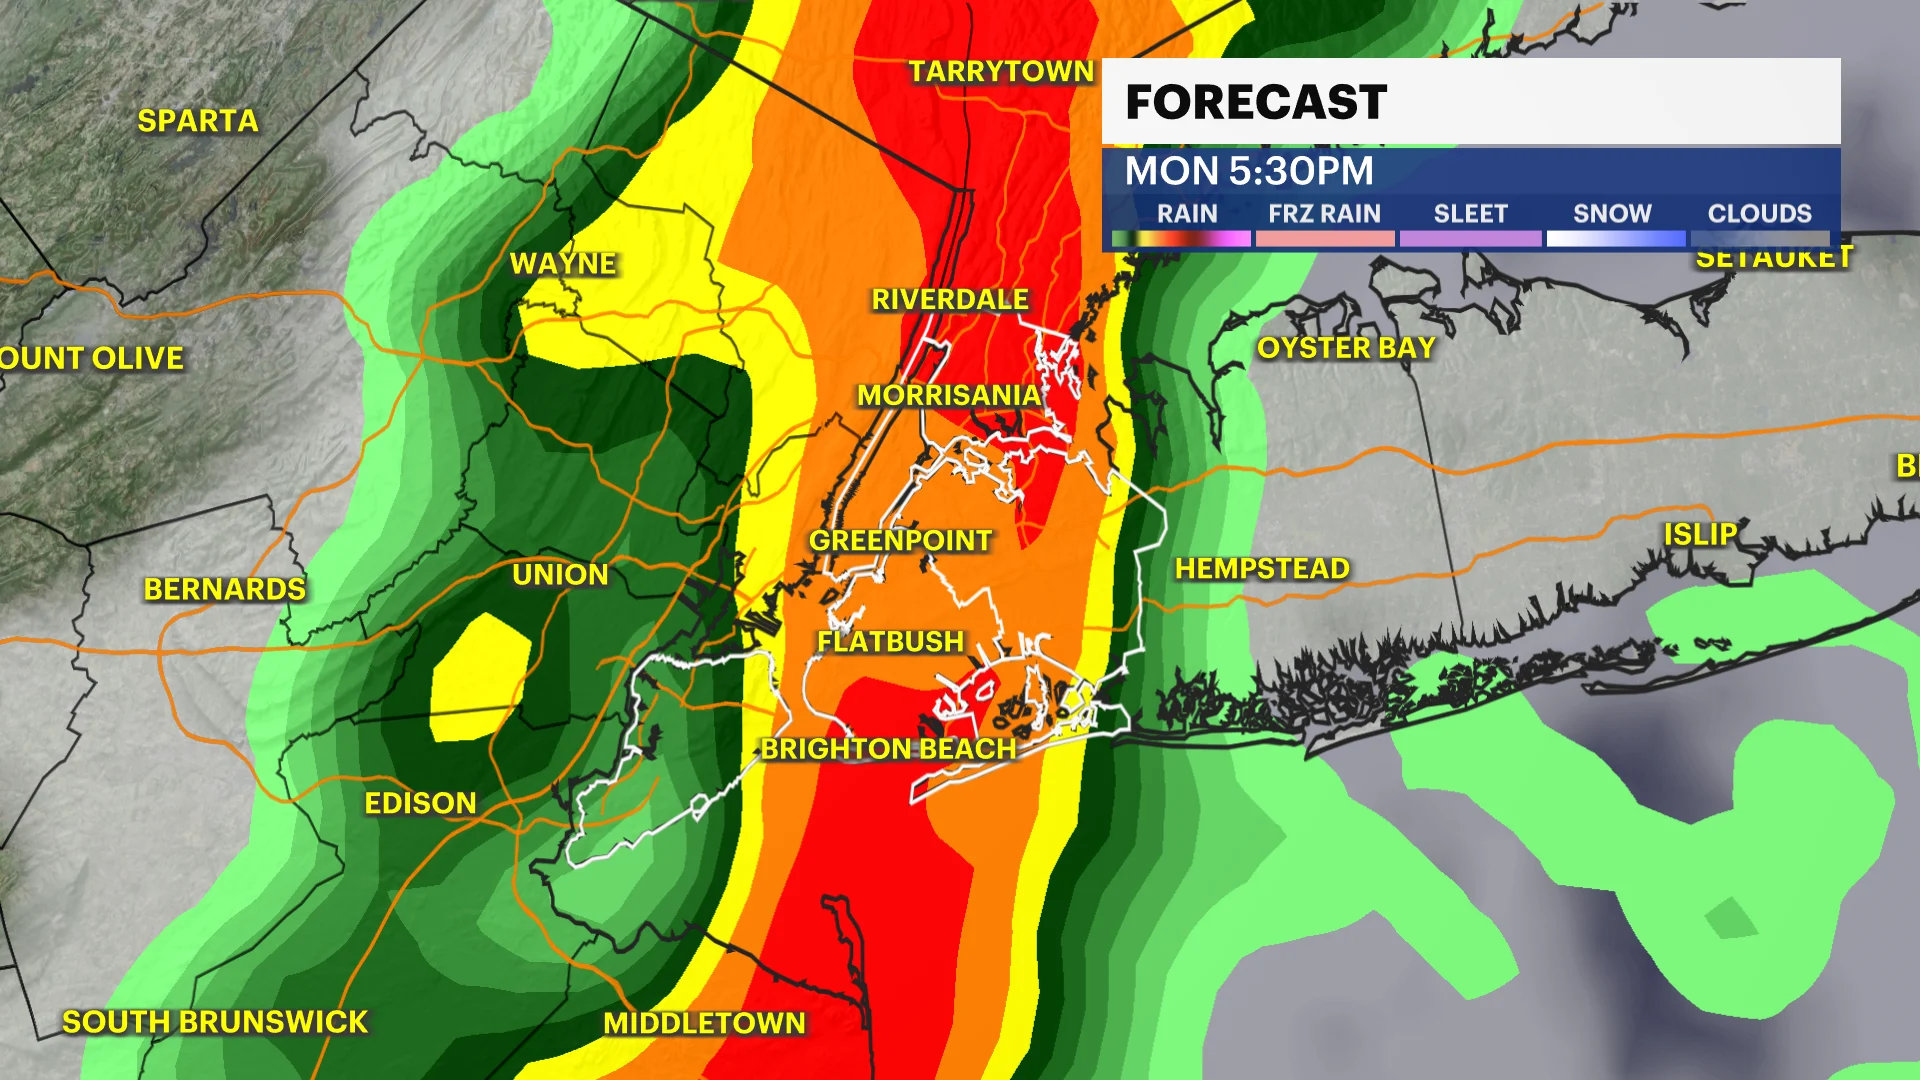 Storm Watch: Severe storms possible with heavy rain, strong wind and hail across New York City